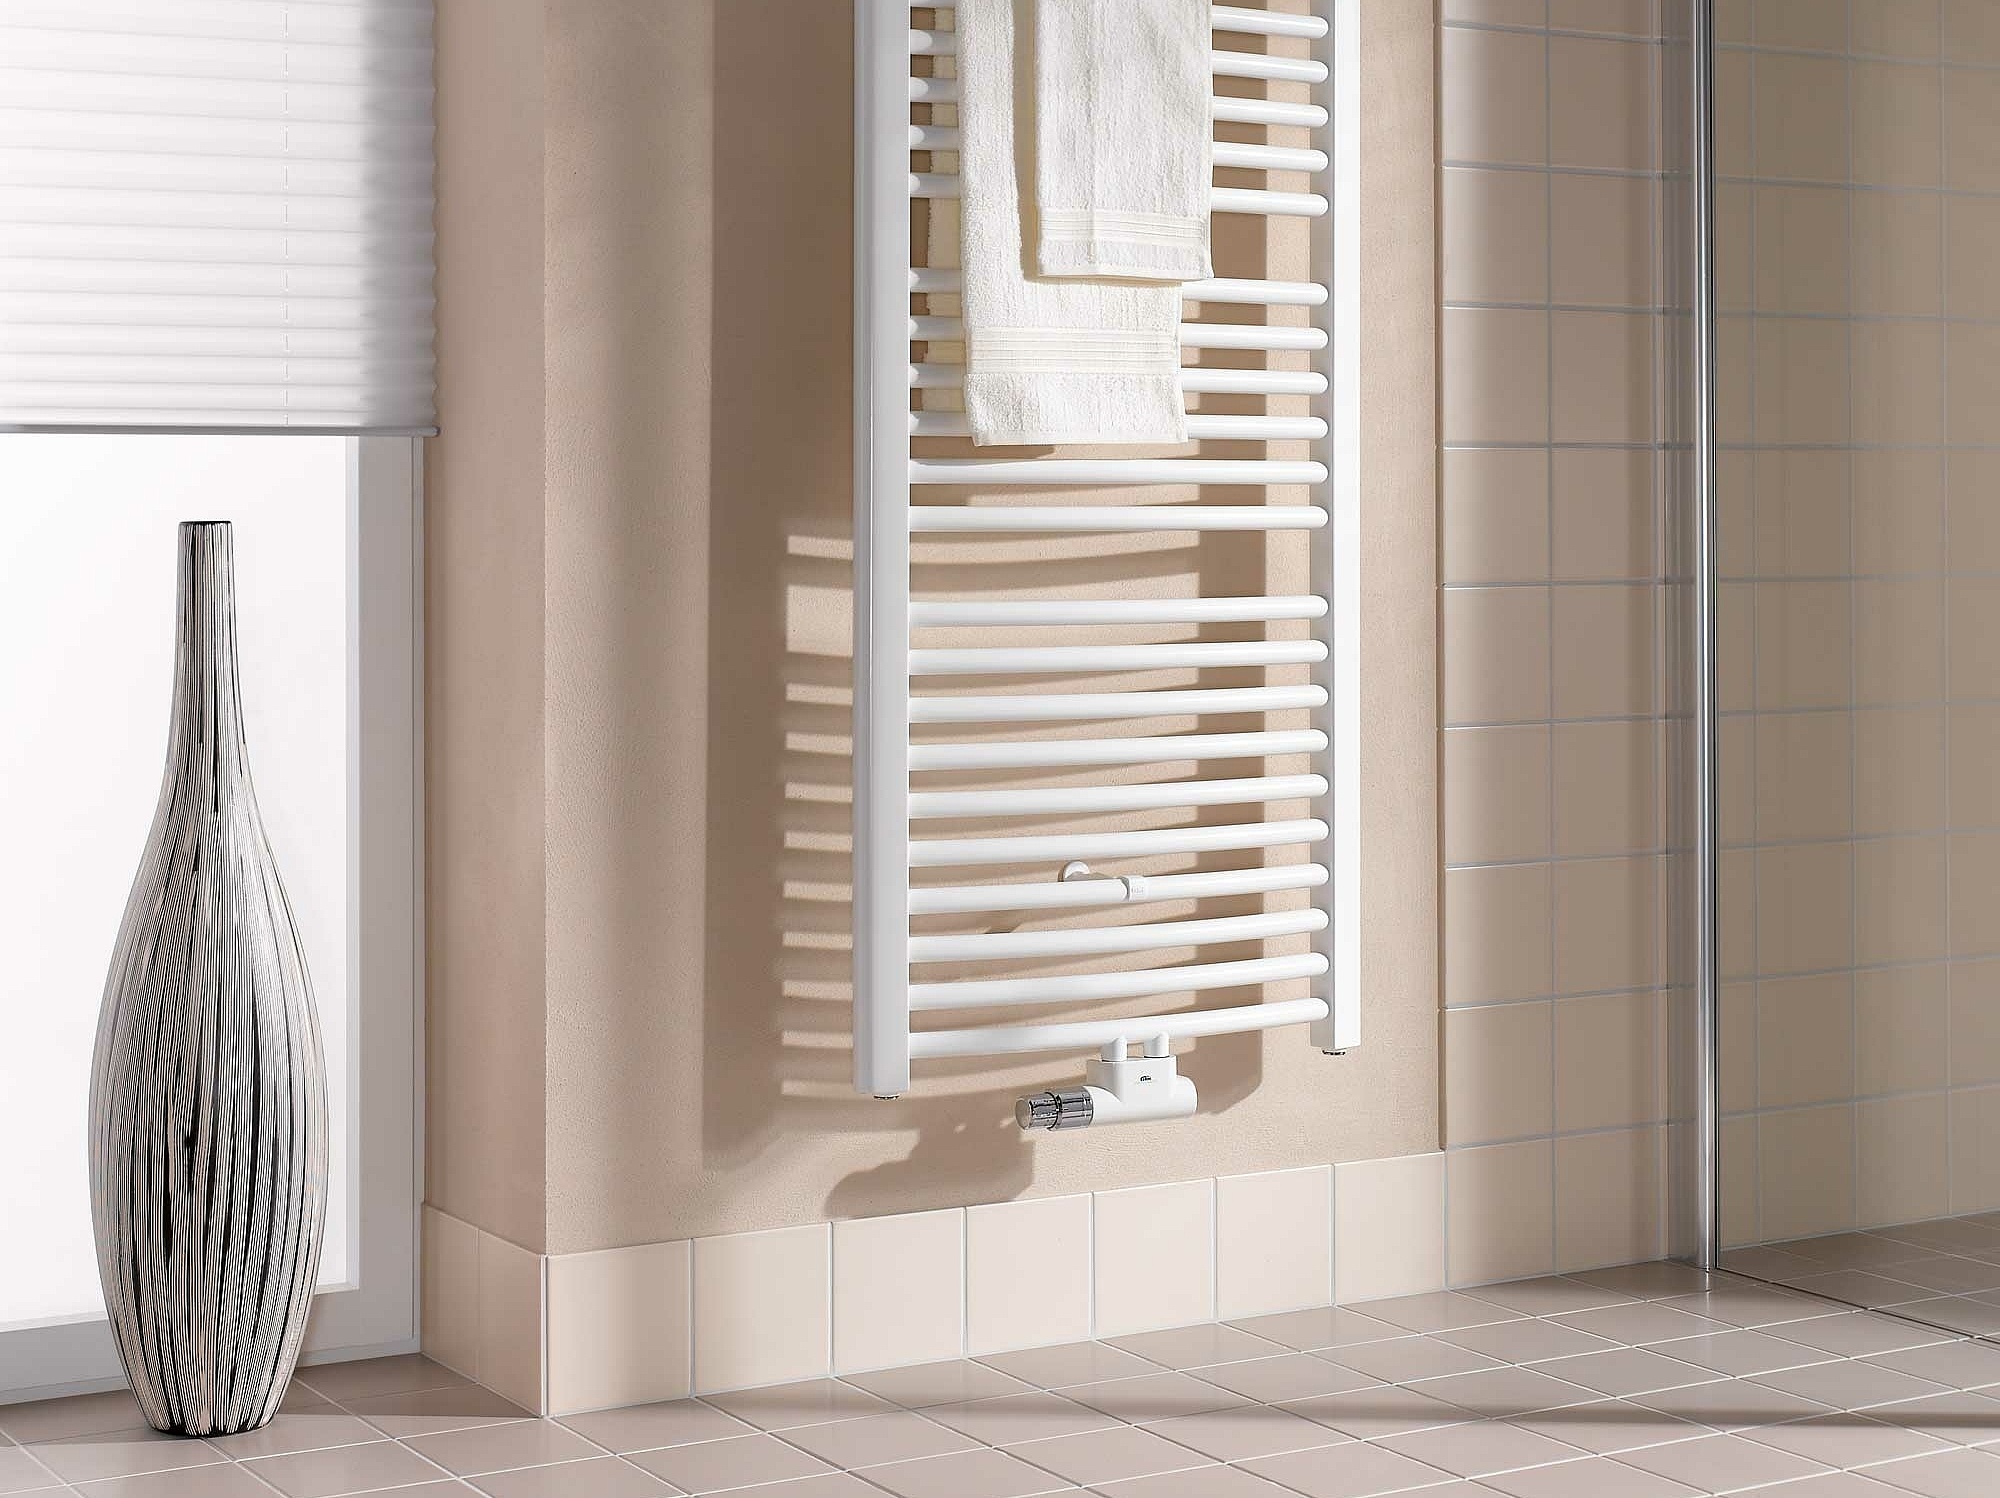 Kermi Basic-50 R design and bathroom radiators – the Basic-50 version with a gentle curve.